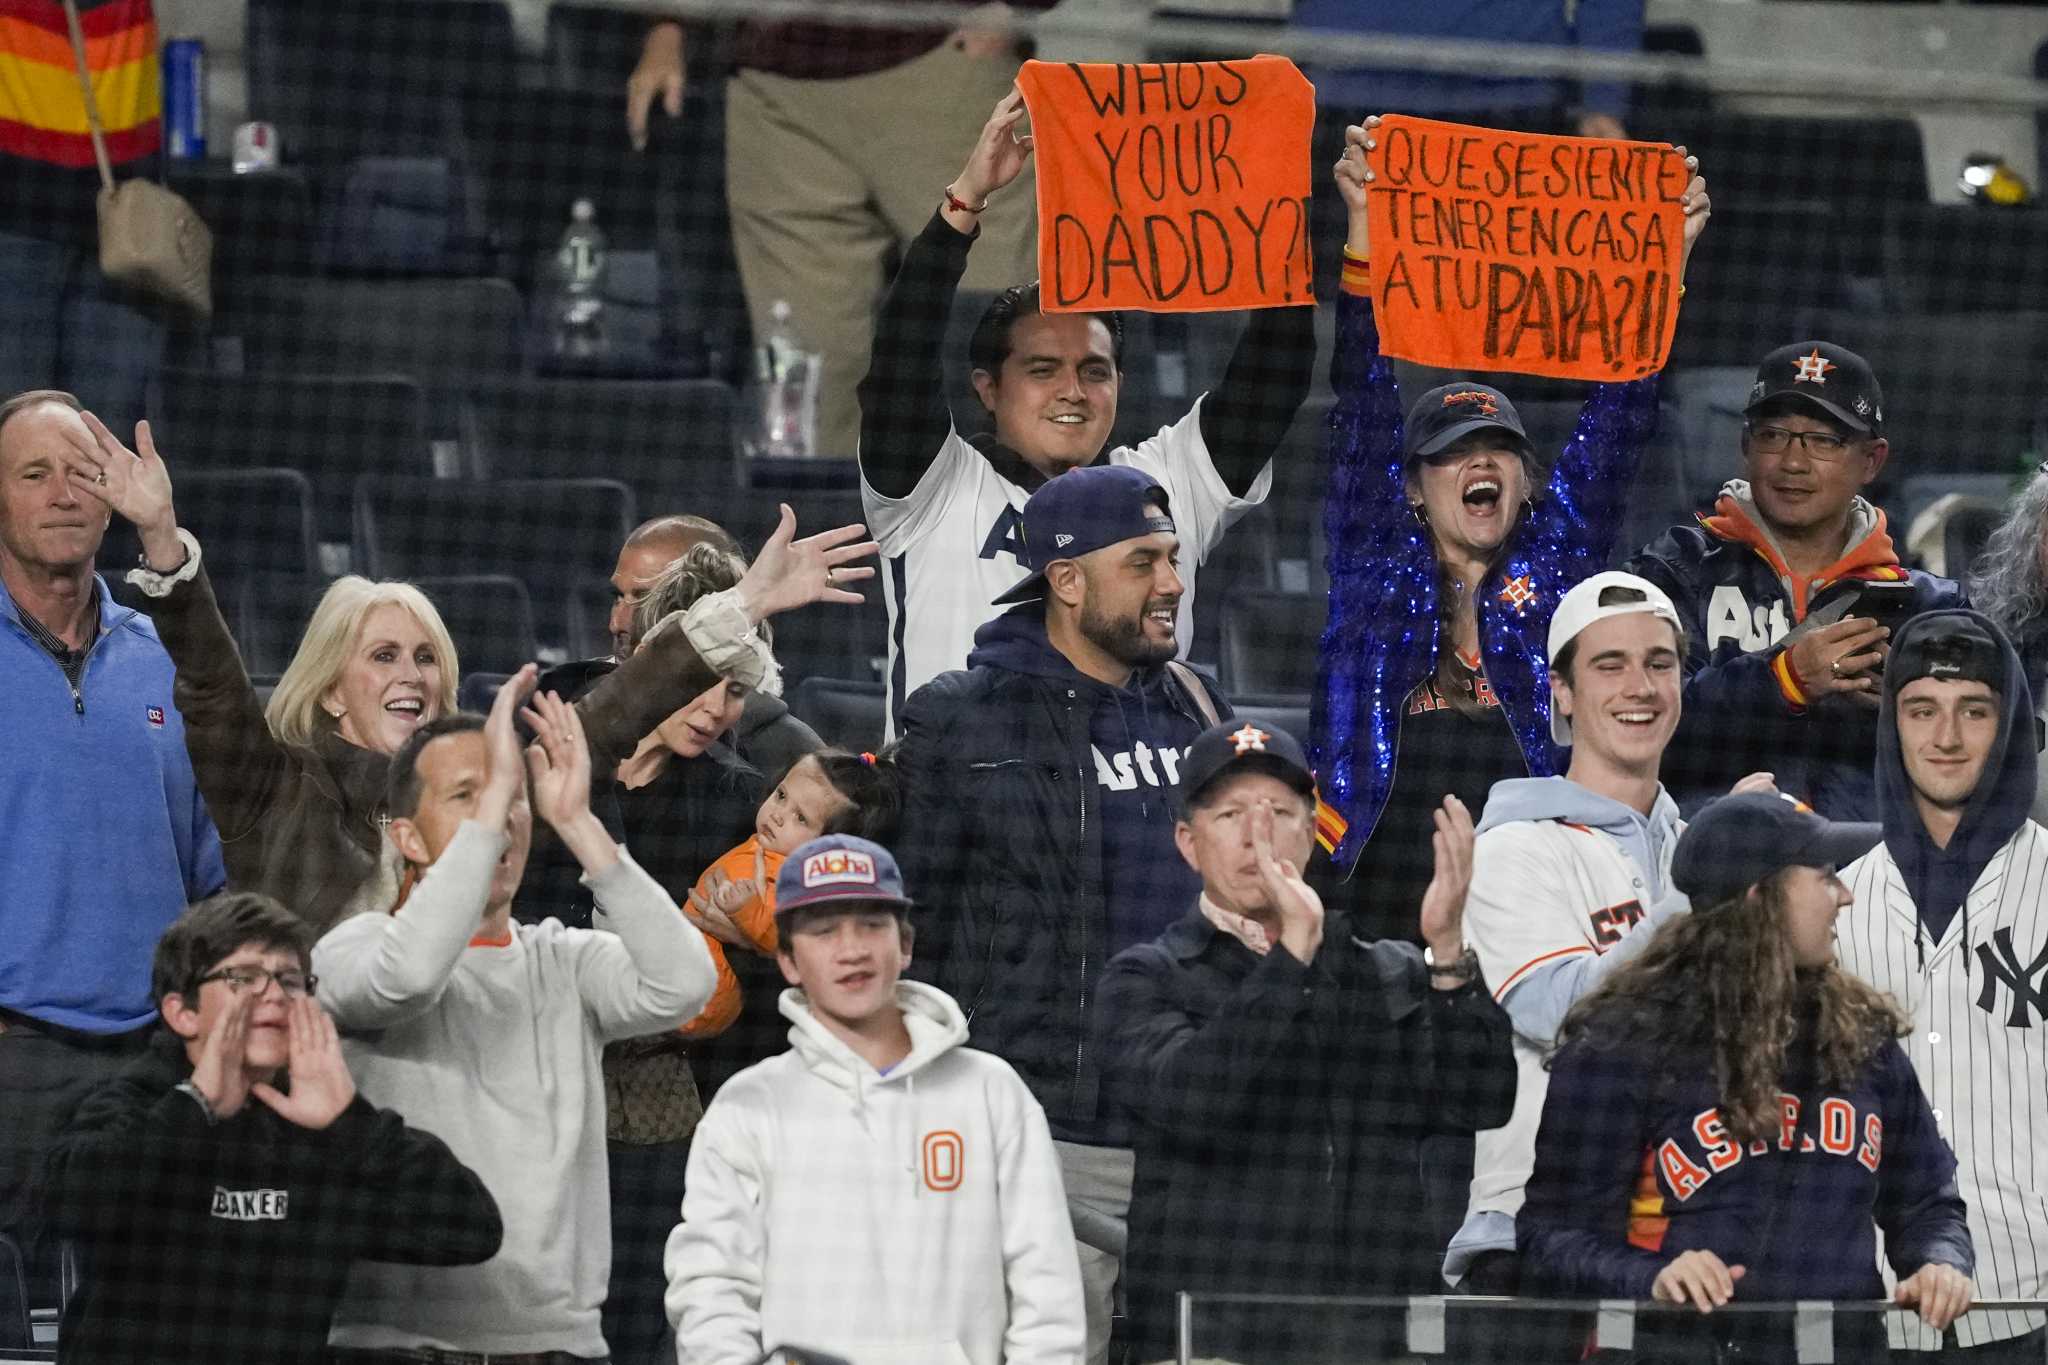 Astros are the Yankees' daddy. #astros #yankees #mlb #houston #houston